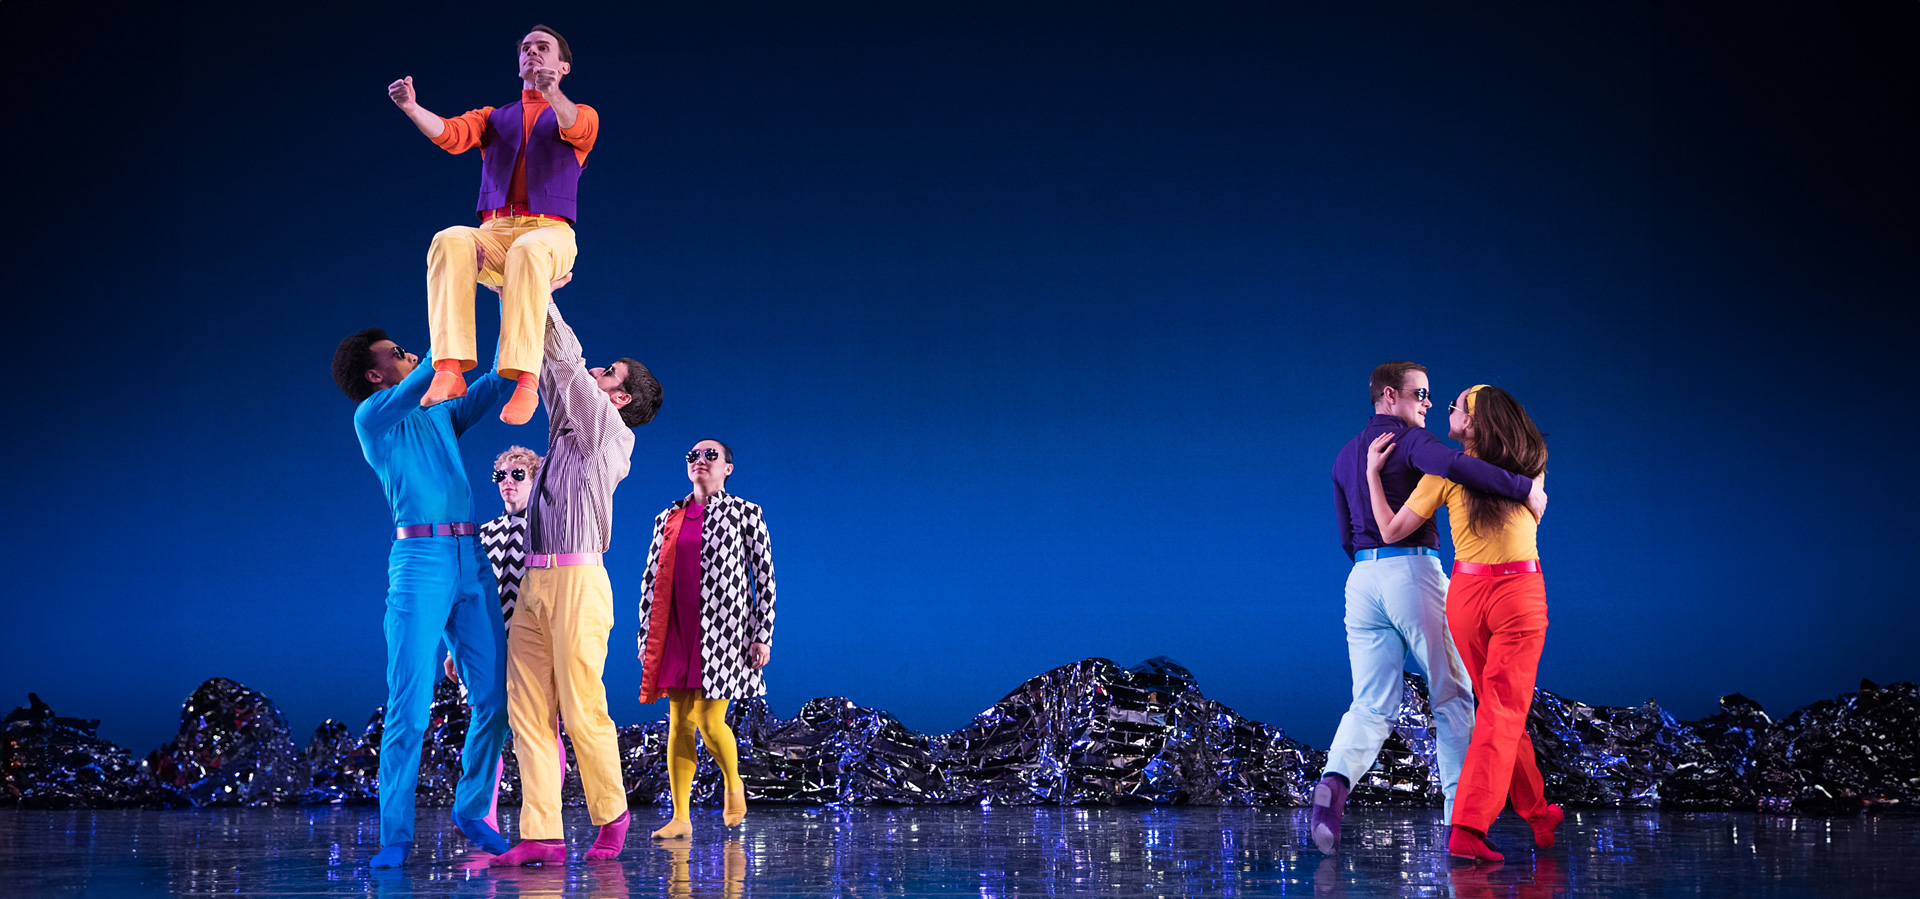 Dancers from the Mark Morris Dance Group perform Pepperland in colorful costumes on a blue-lit stage.